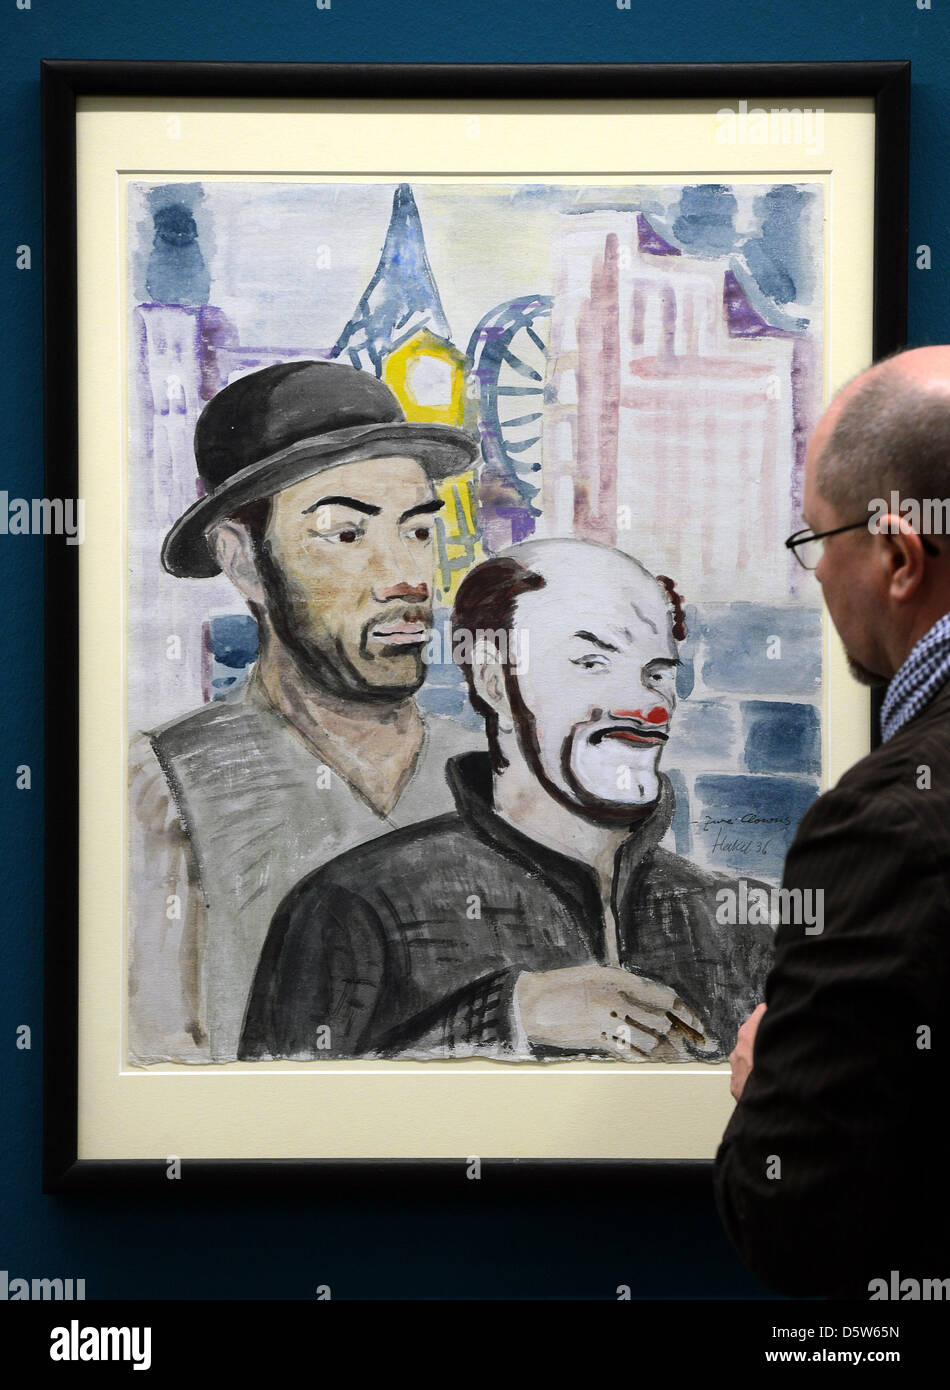 A man views the watercolour 'Two Clowns' at the new exhibition 'Erich Heckel. Power of the Line' at the art museum Moritzburg in Halle/Saale, Germany, 04 October 2012. The exhibition will open on 06 October 2012 and displays 65 drawings and watercolours of the 'Bridge'-artist which give an overview of his artistic development. Photo: Hendrik Schmidt Stock Photo